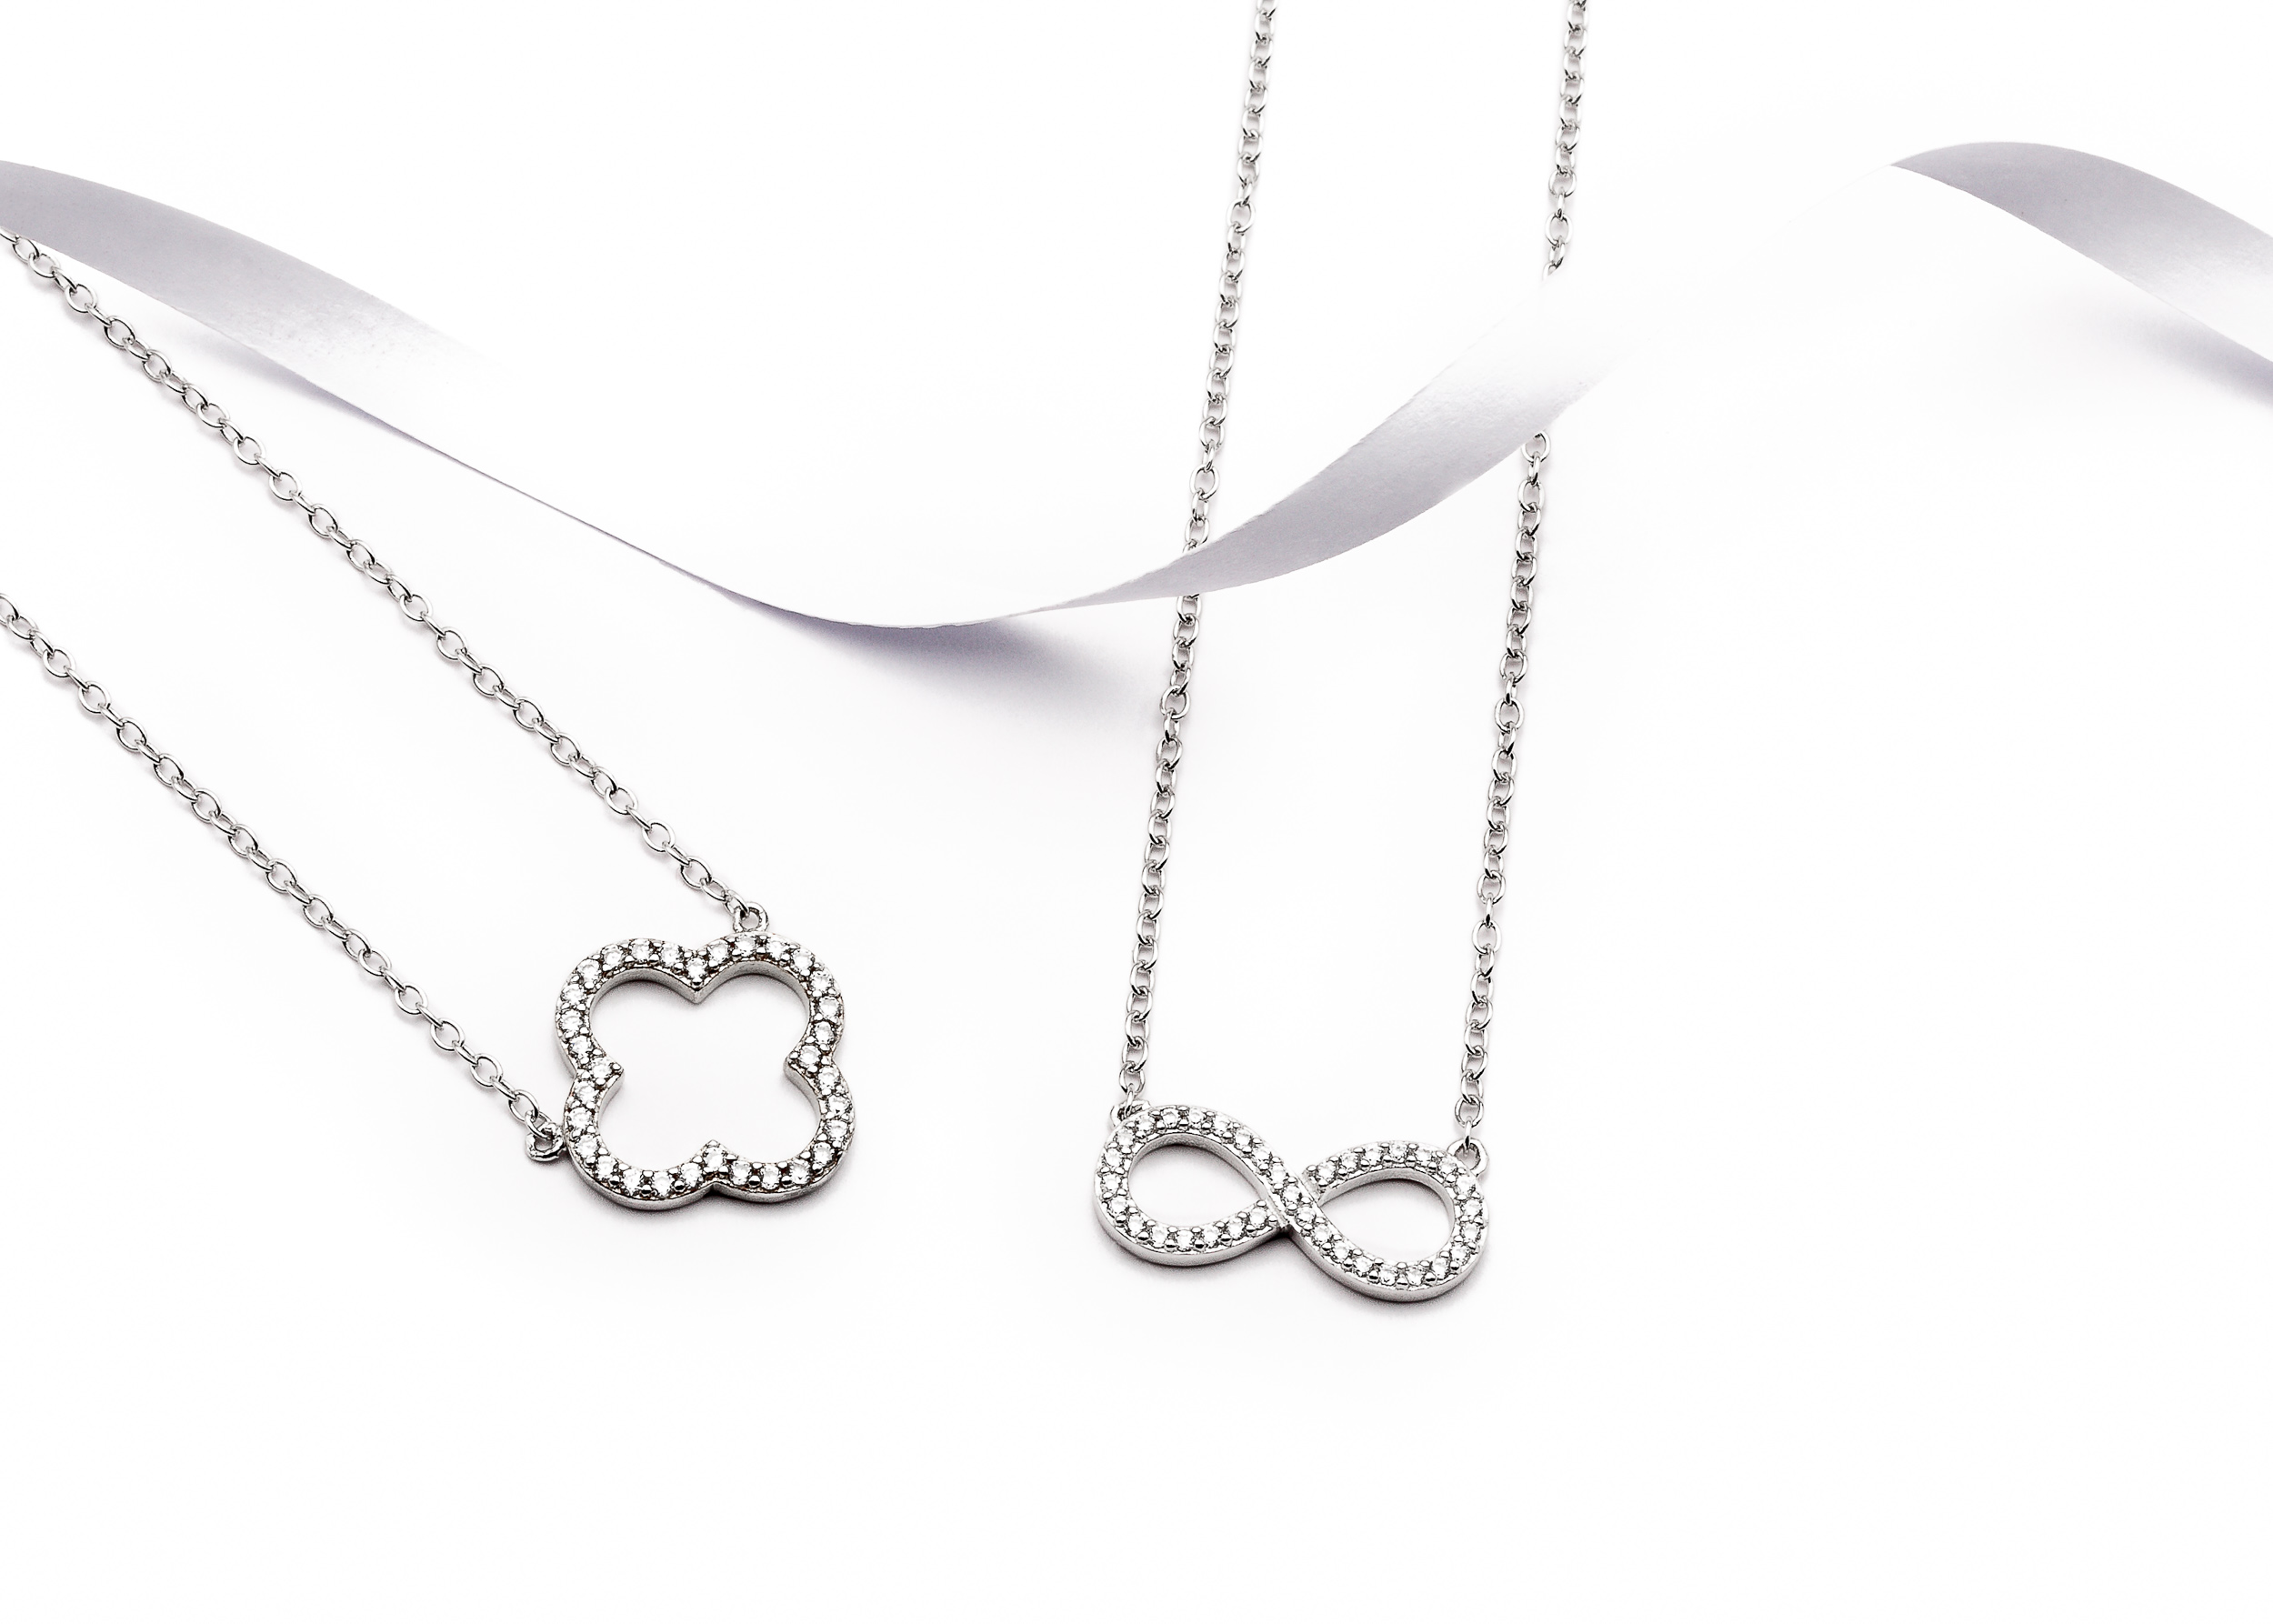 Silver Diamond Necklaces | Commercial Product Shot 